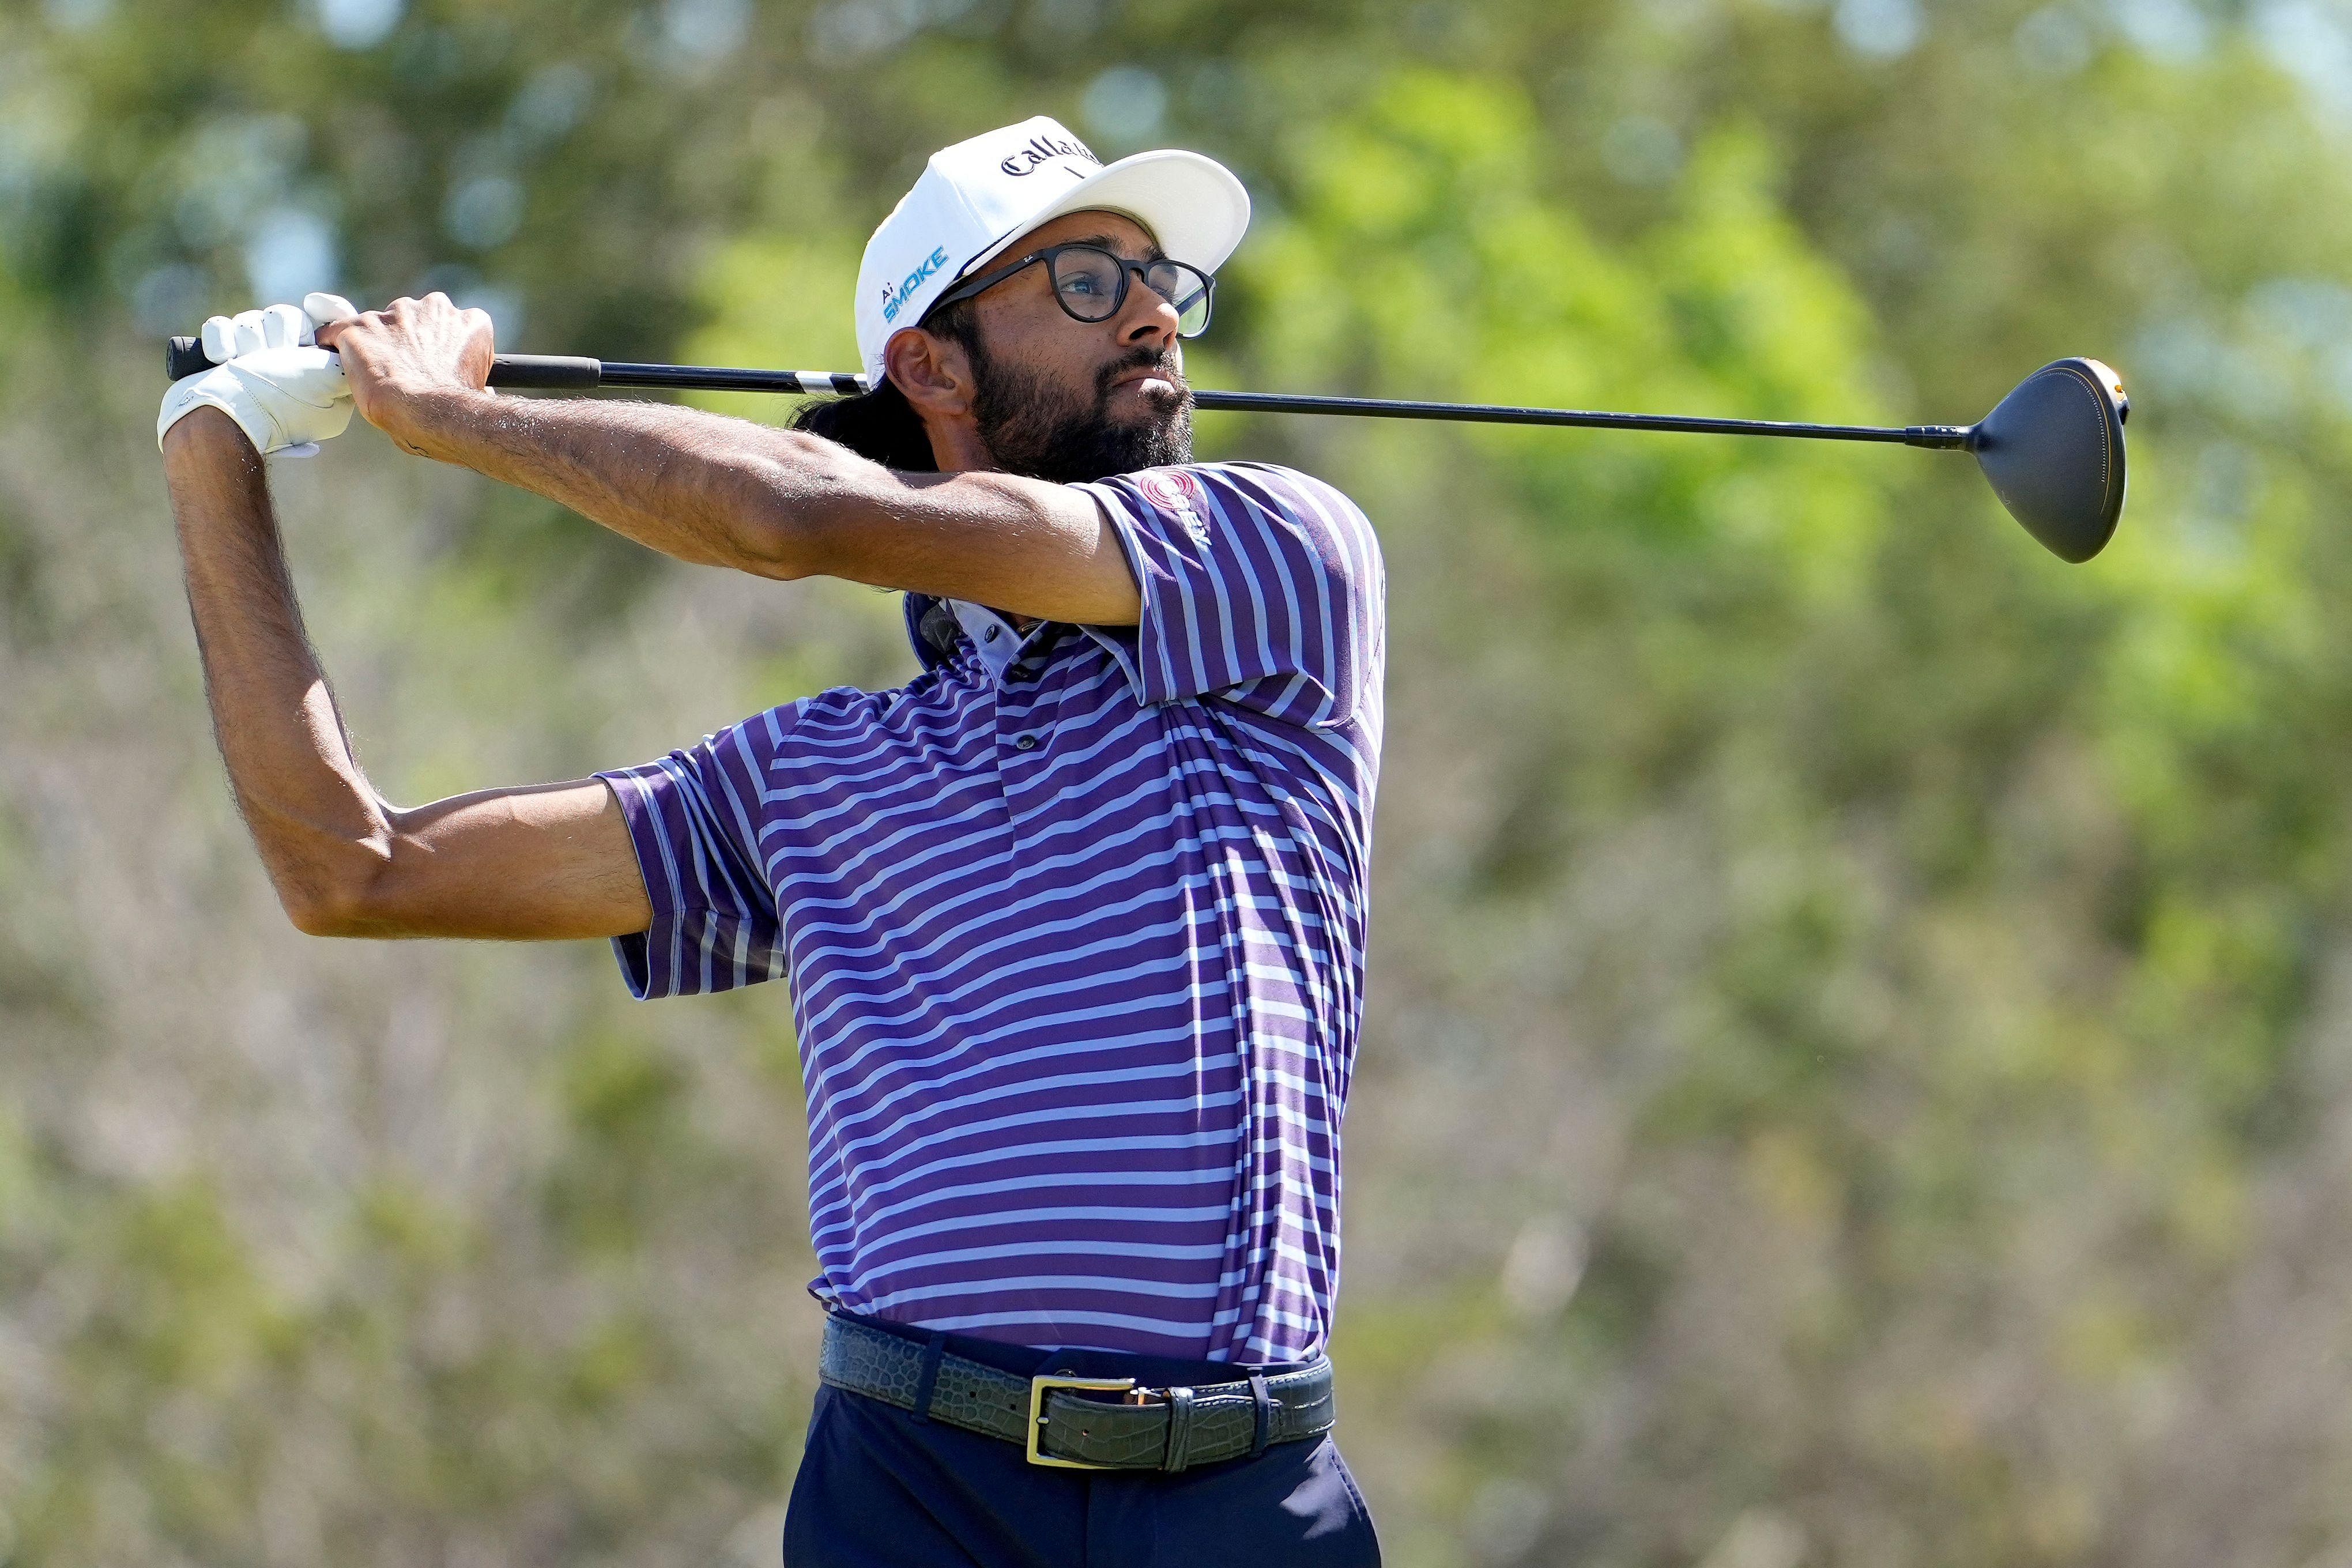 Bhatia stretches lead to five strokes at PGA Texas Open